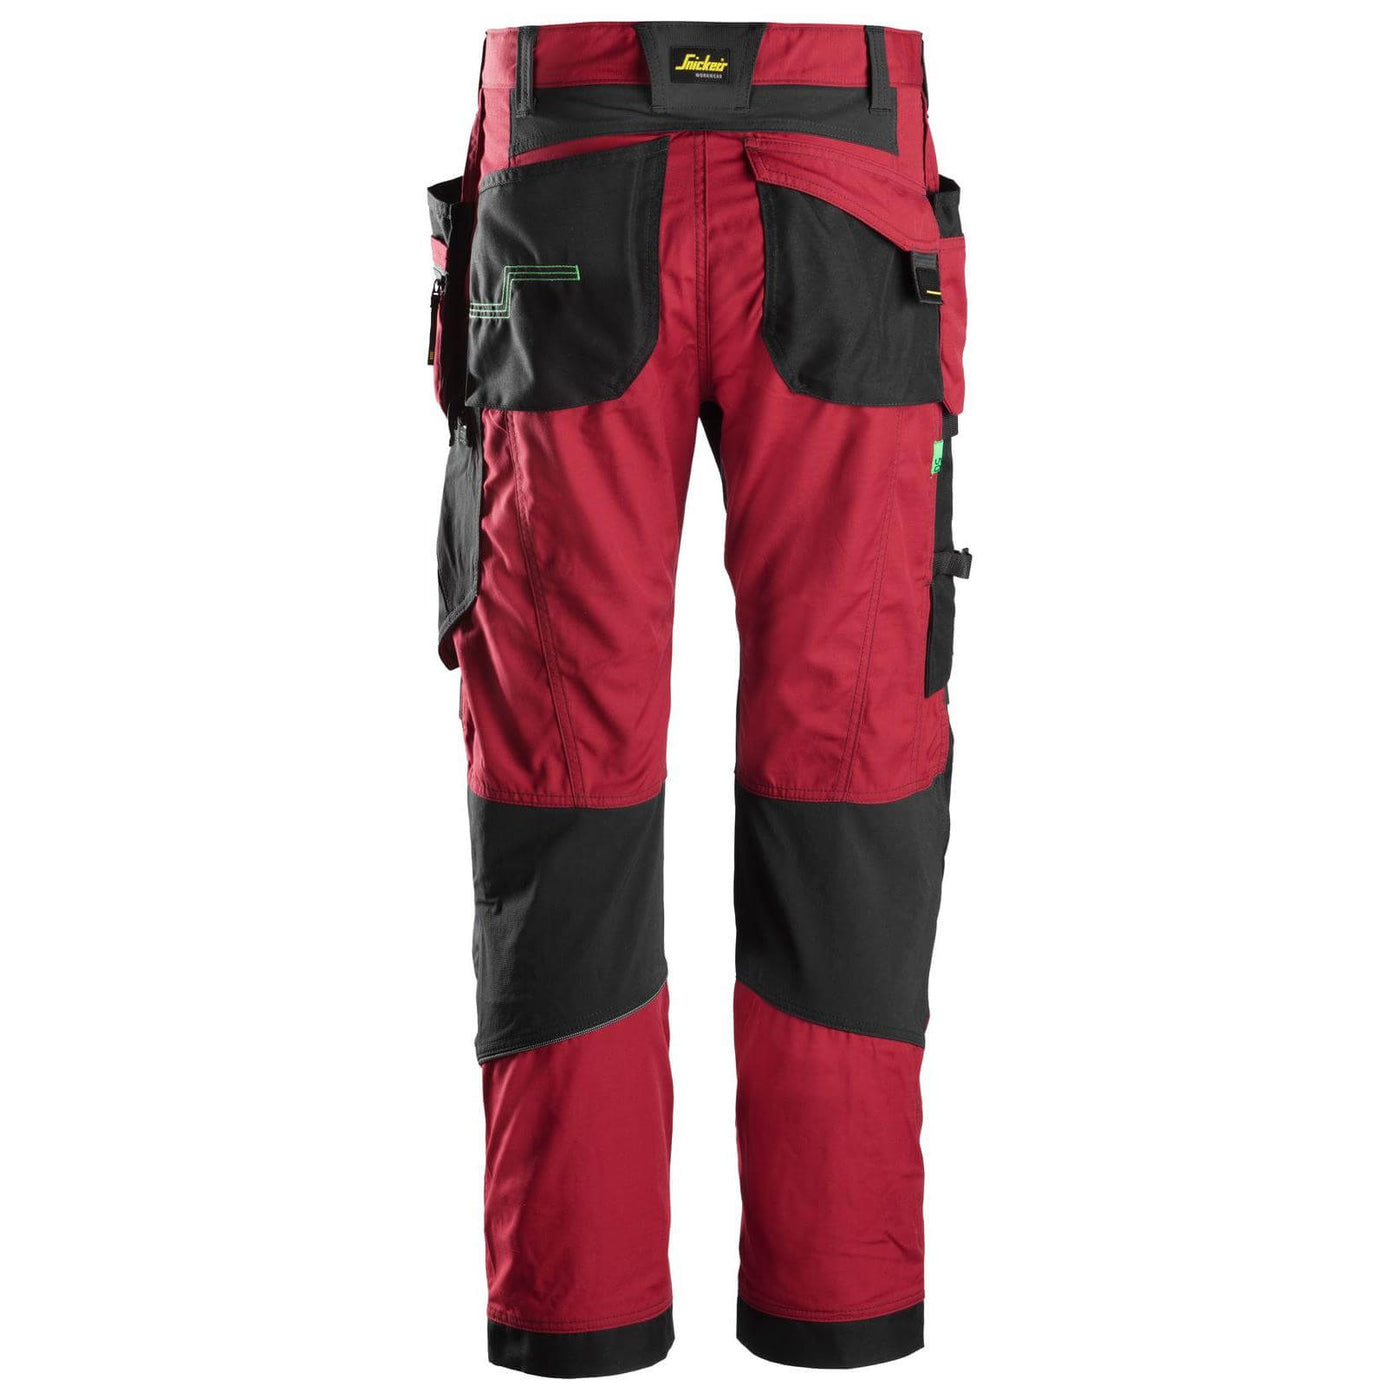 Snickers 6902 FlexiWork Lightweight Work Trousers with Holster Pockets Chili Red Black back #colour_chili-red-black